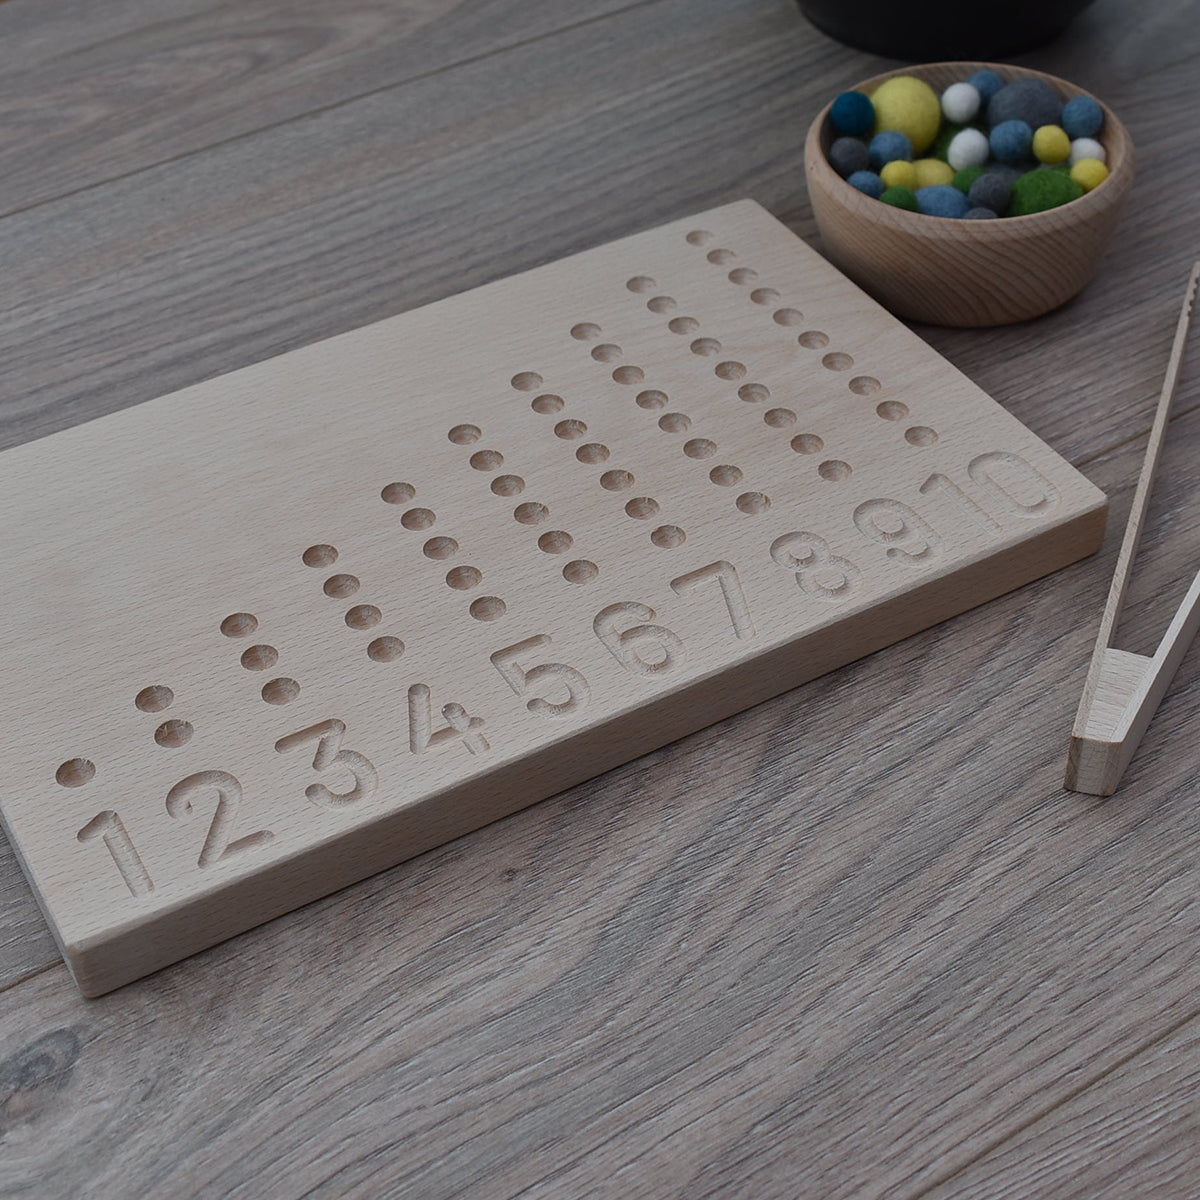 Montessori inspired Wooden Educational Resource Abacus for Counting